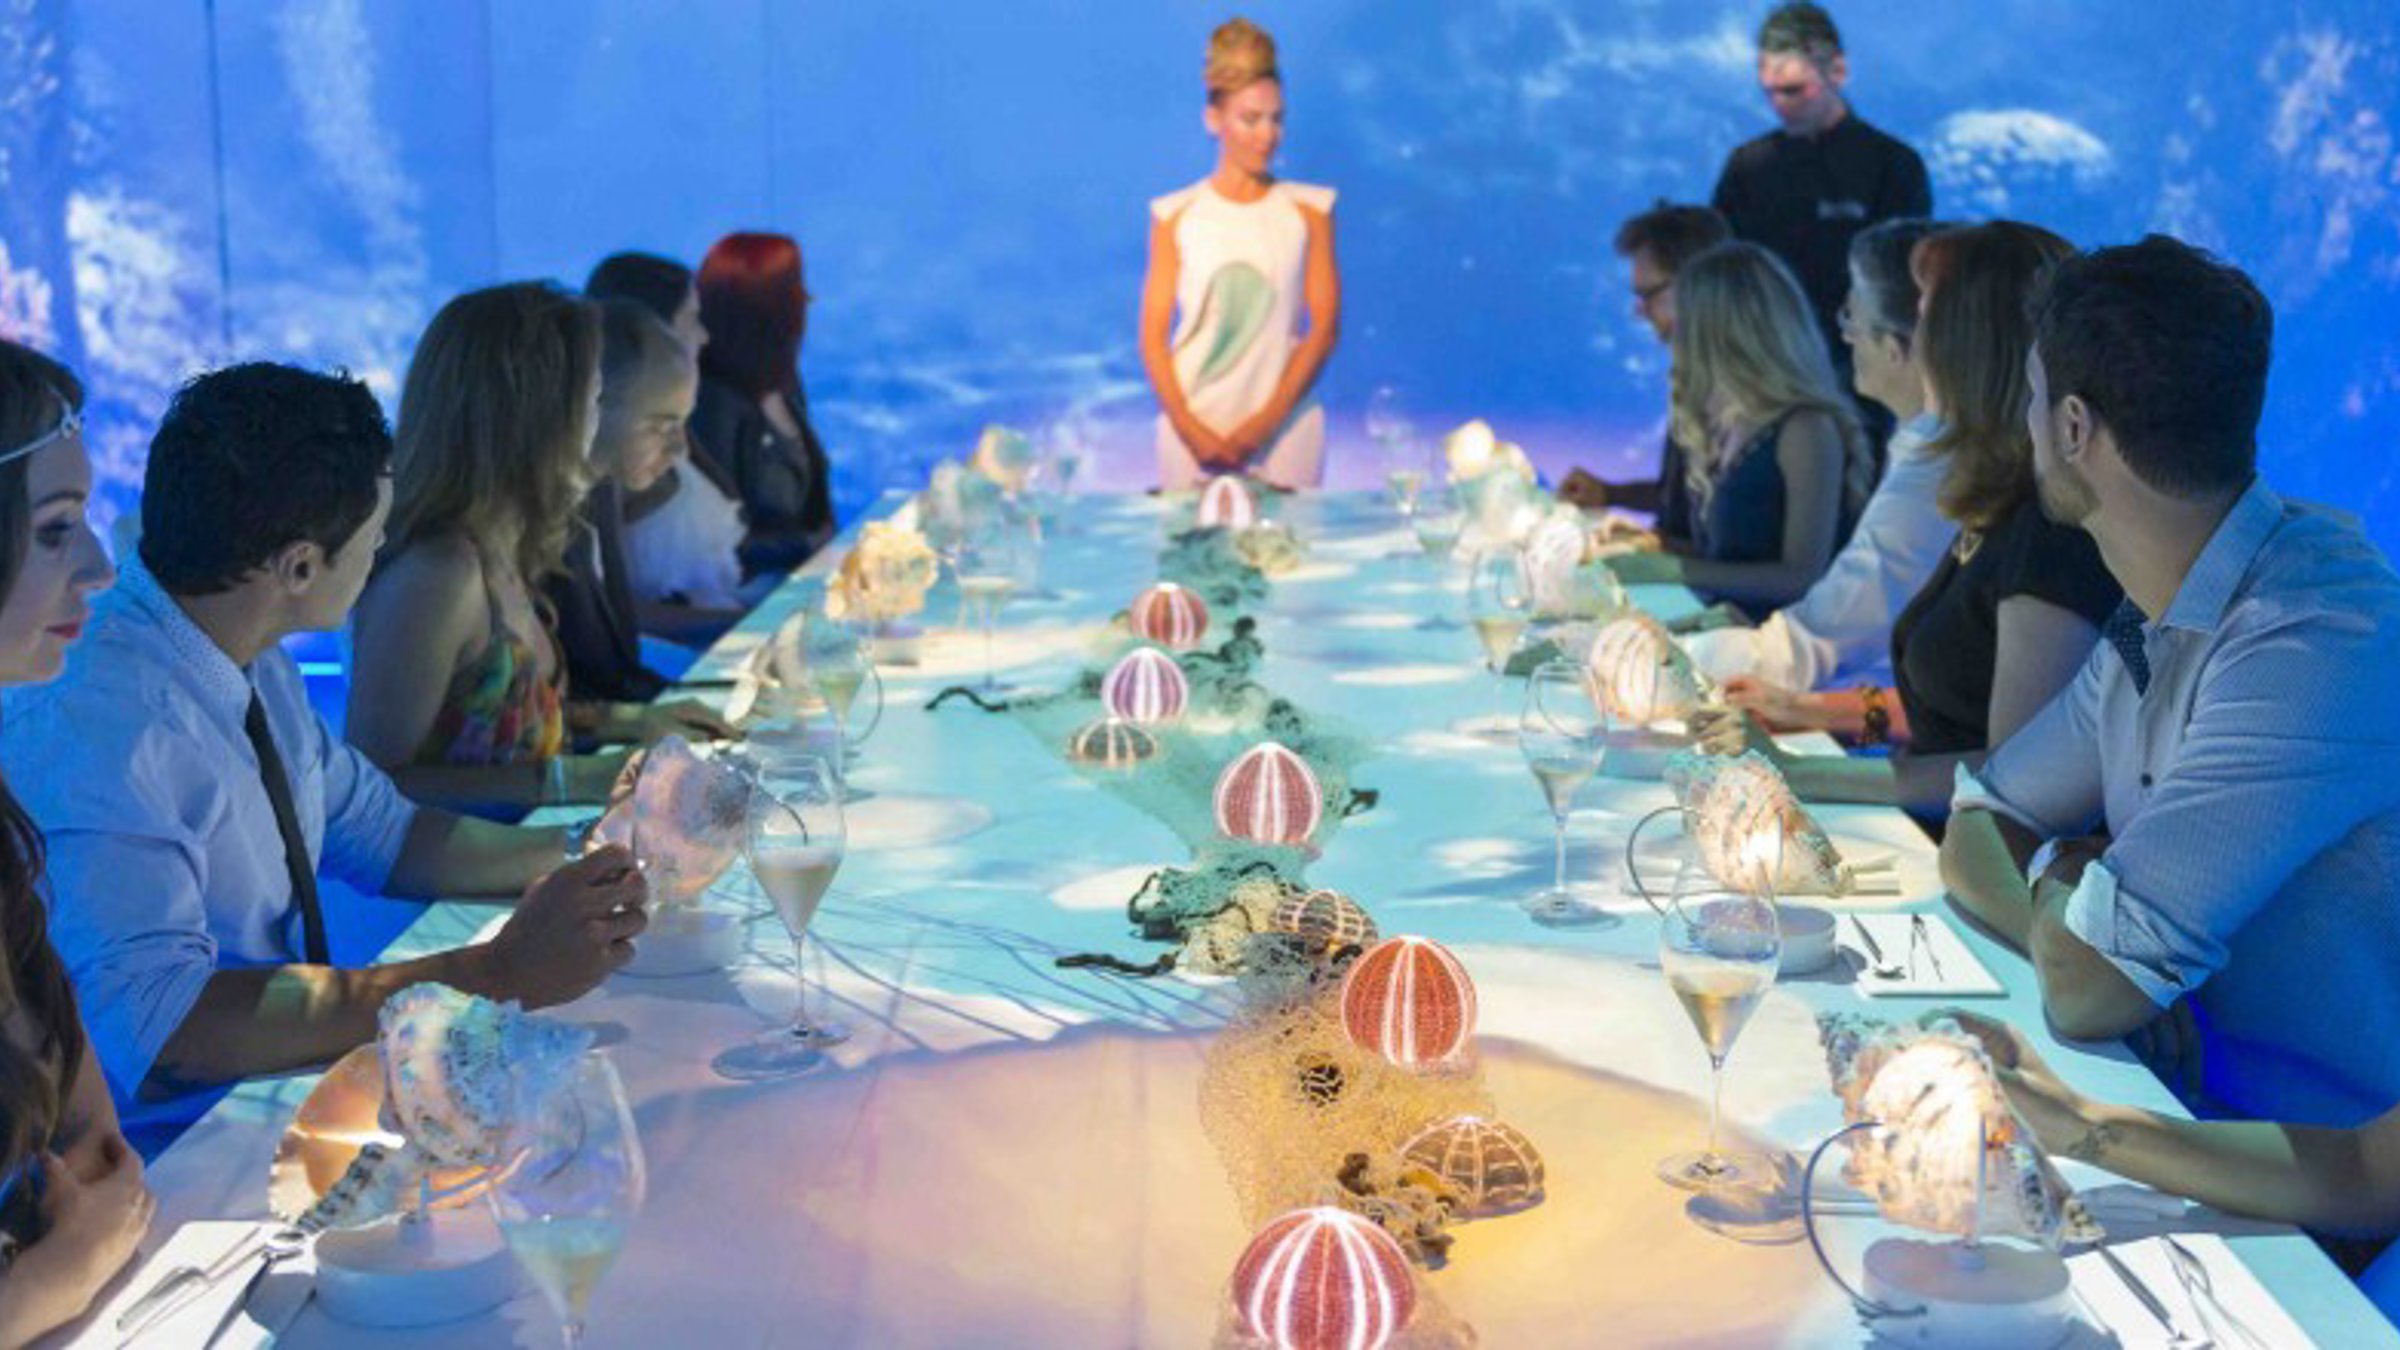 Sublimotion: The Haute Cuisine Dining Experience with Spectacular Technology